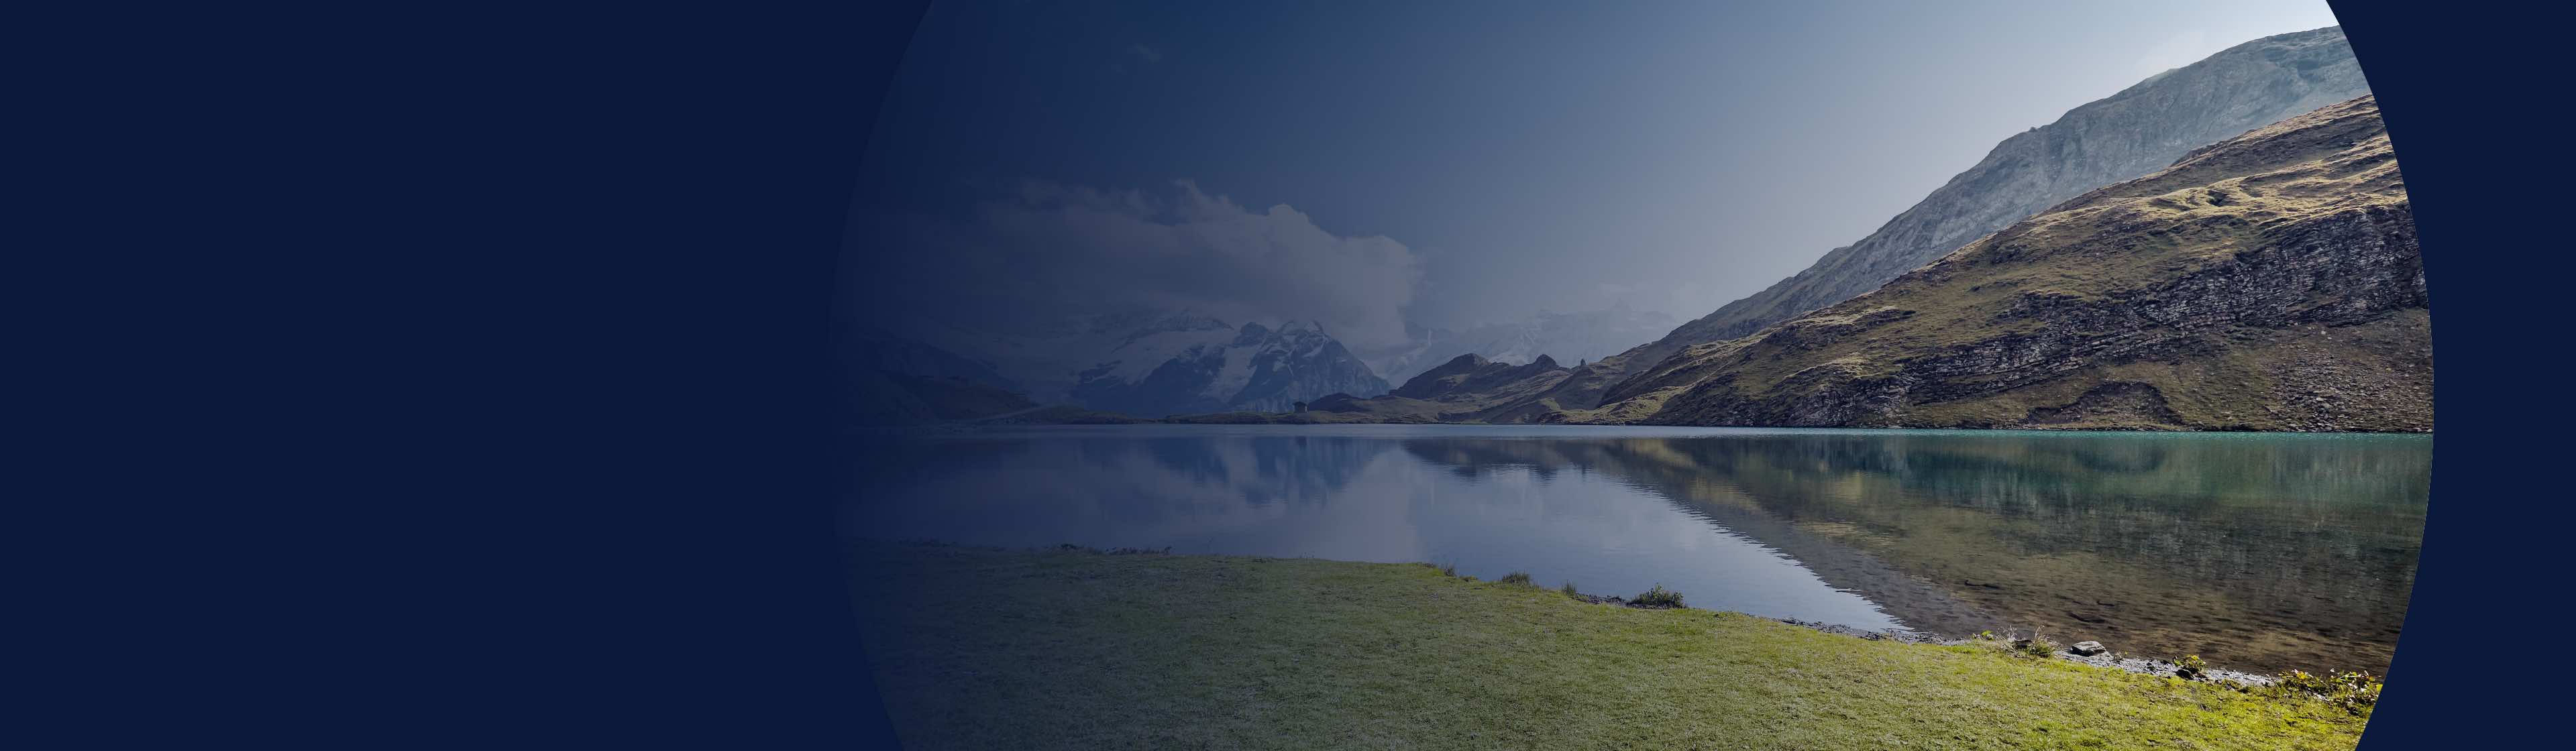 Photograph of a lakeside landscape for Snow Partner banner 